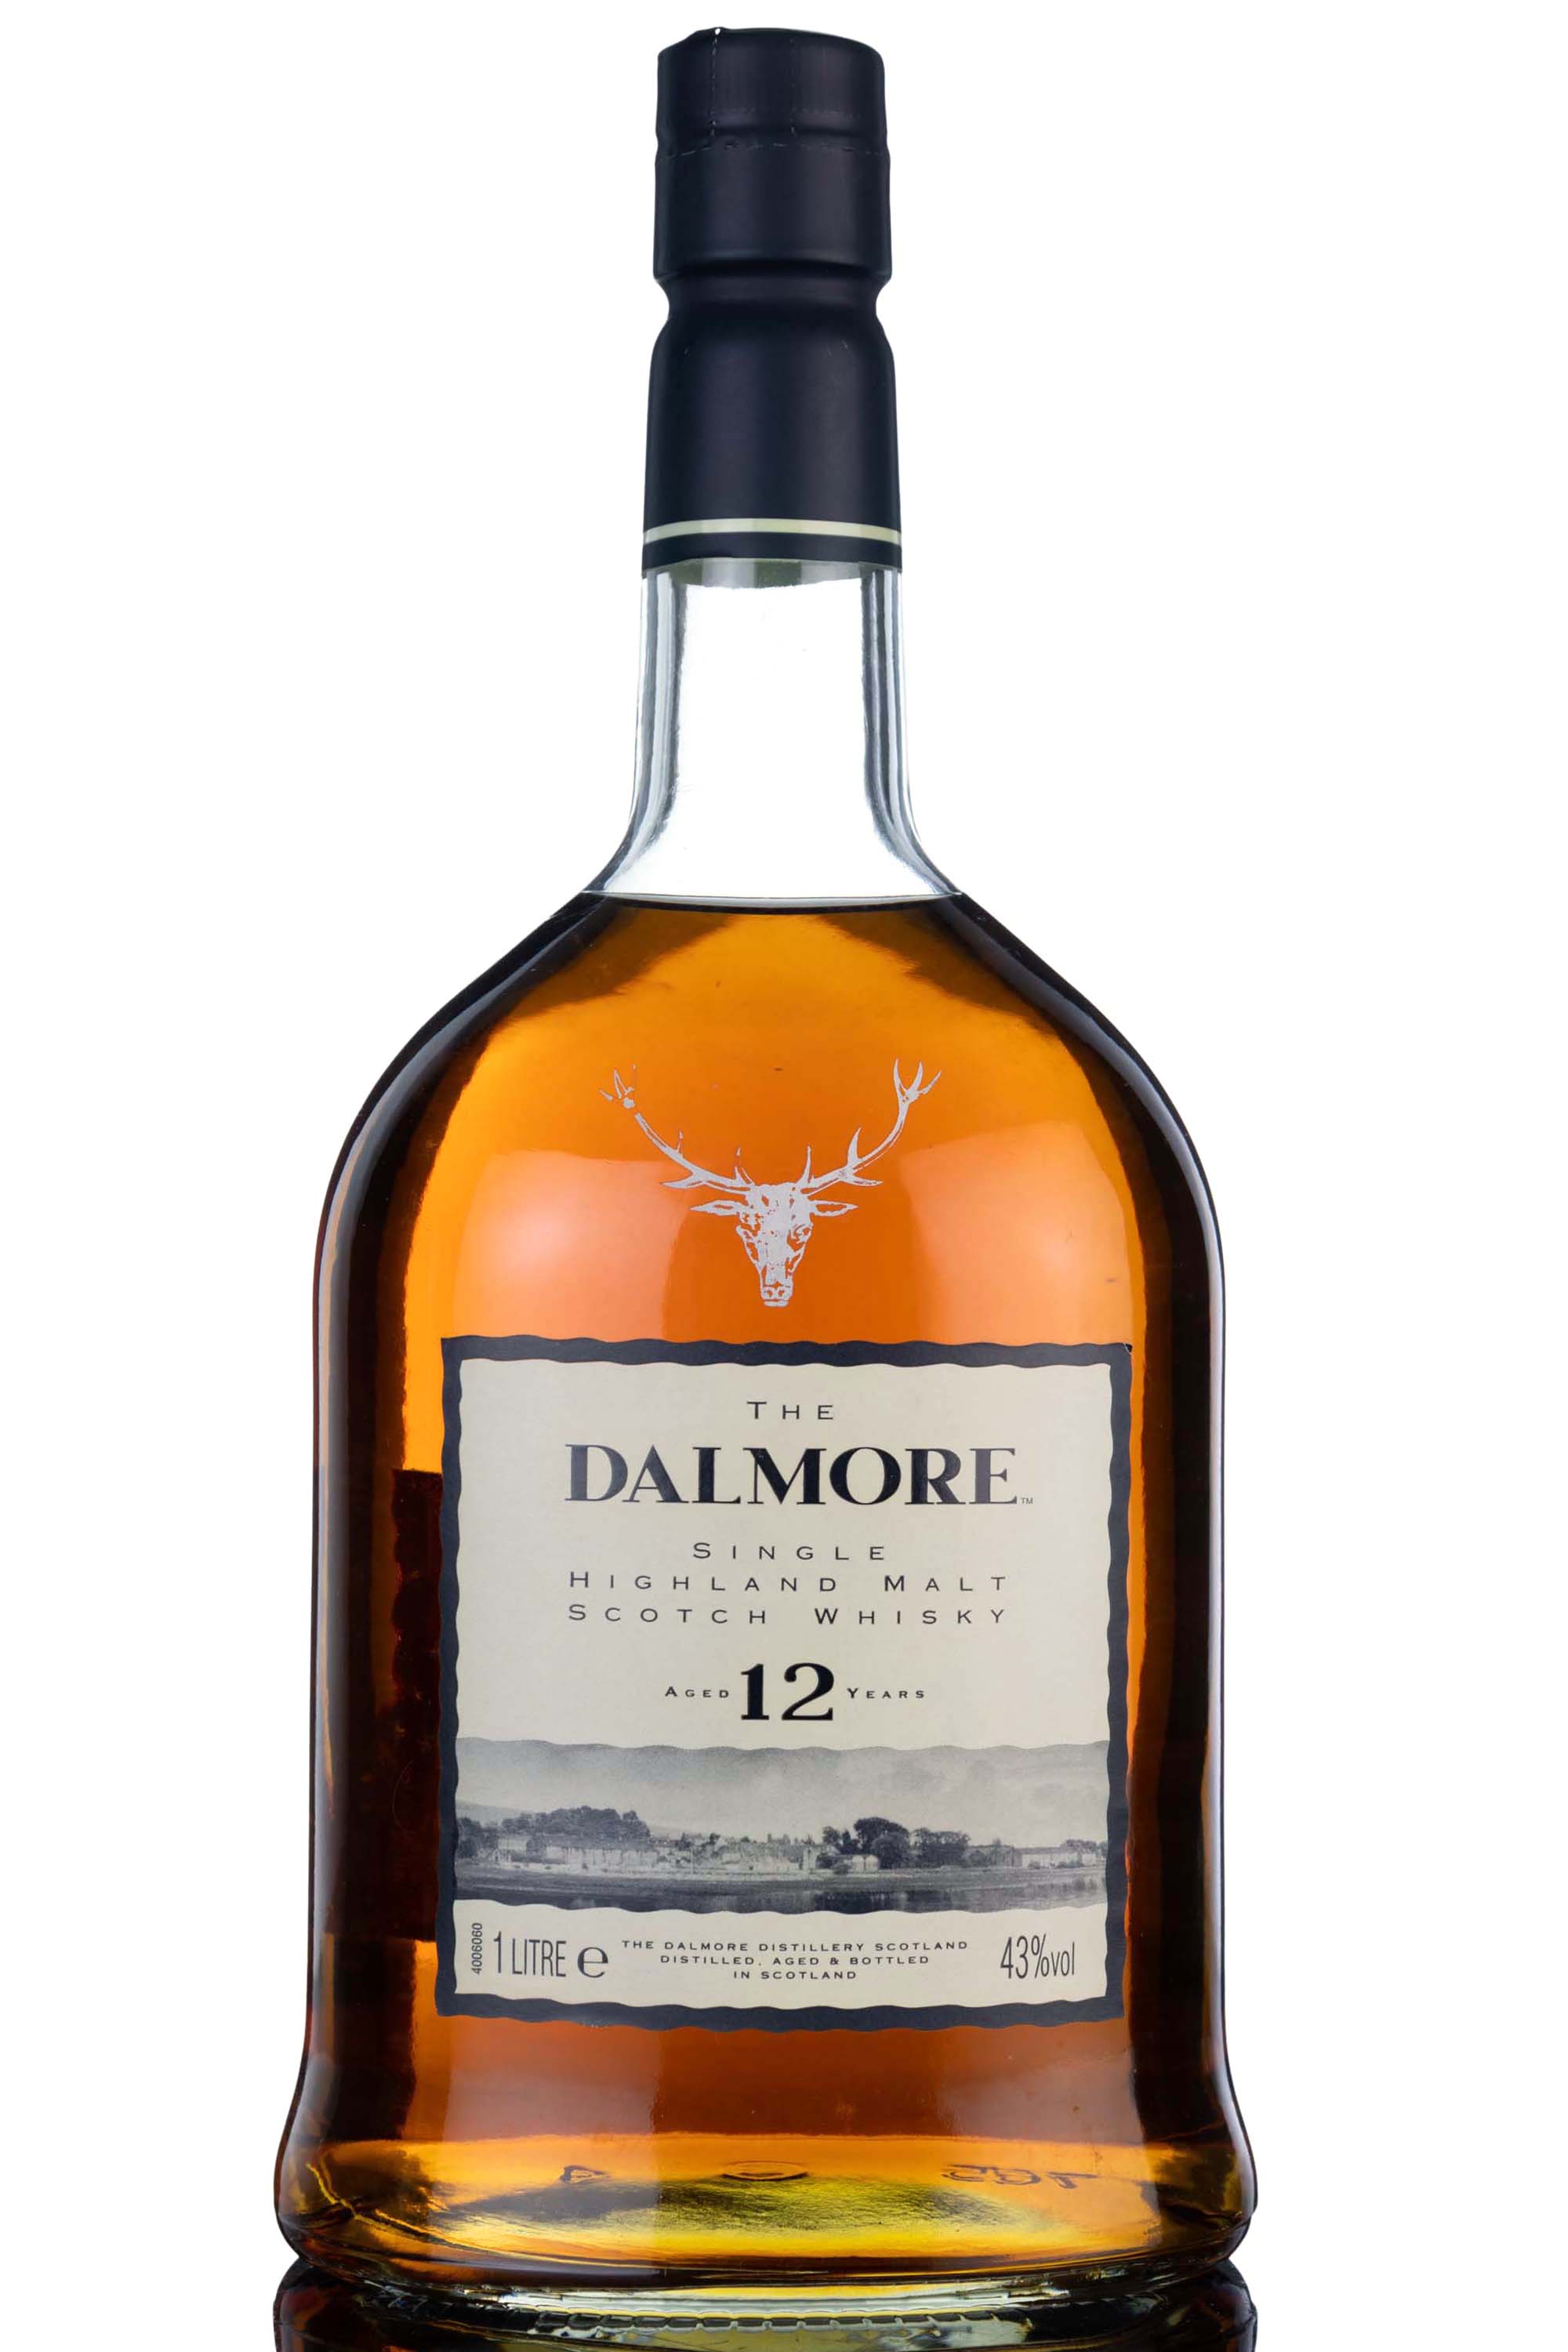 Dalmore 12 Year Old - Early 2000s - 1 Litre